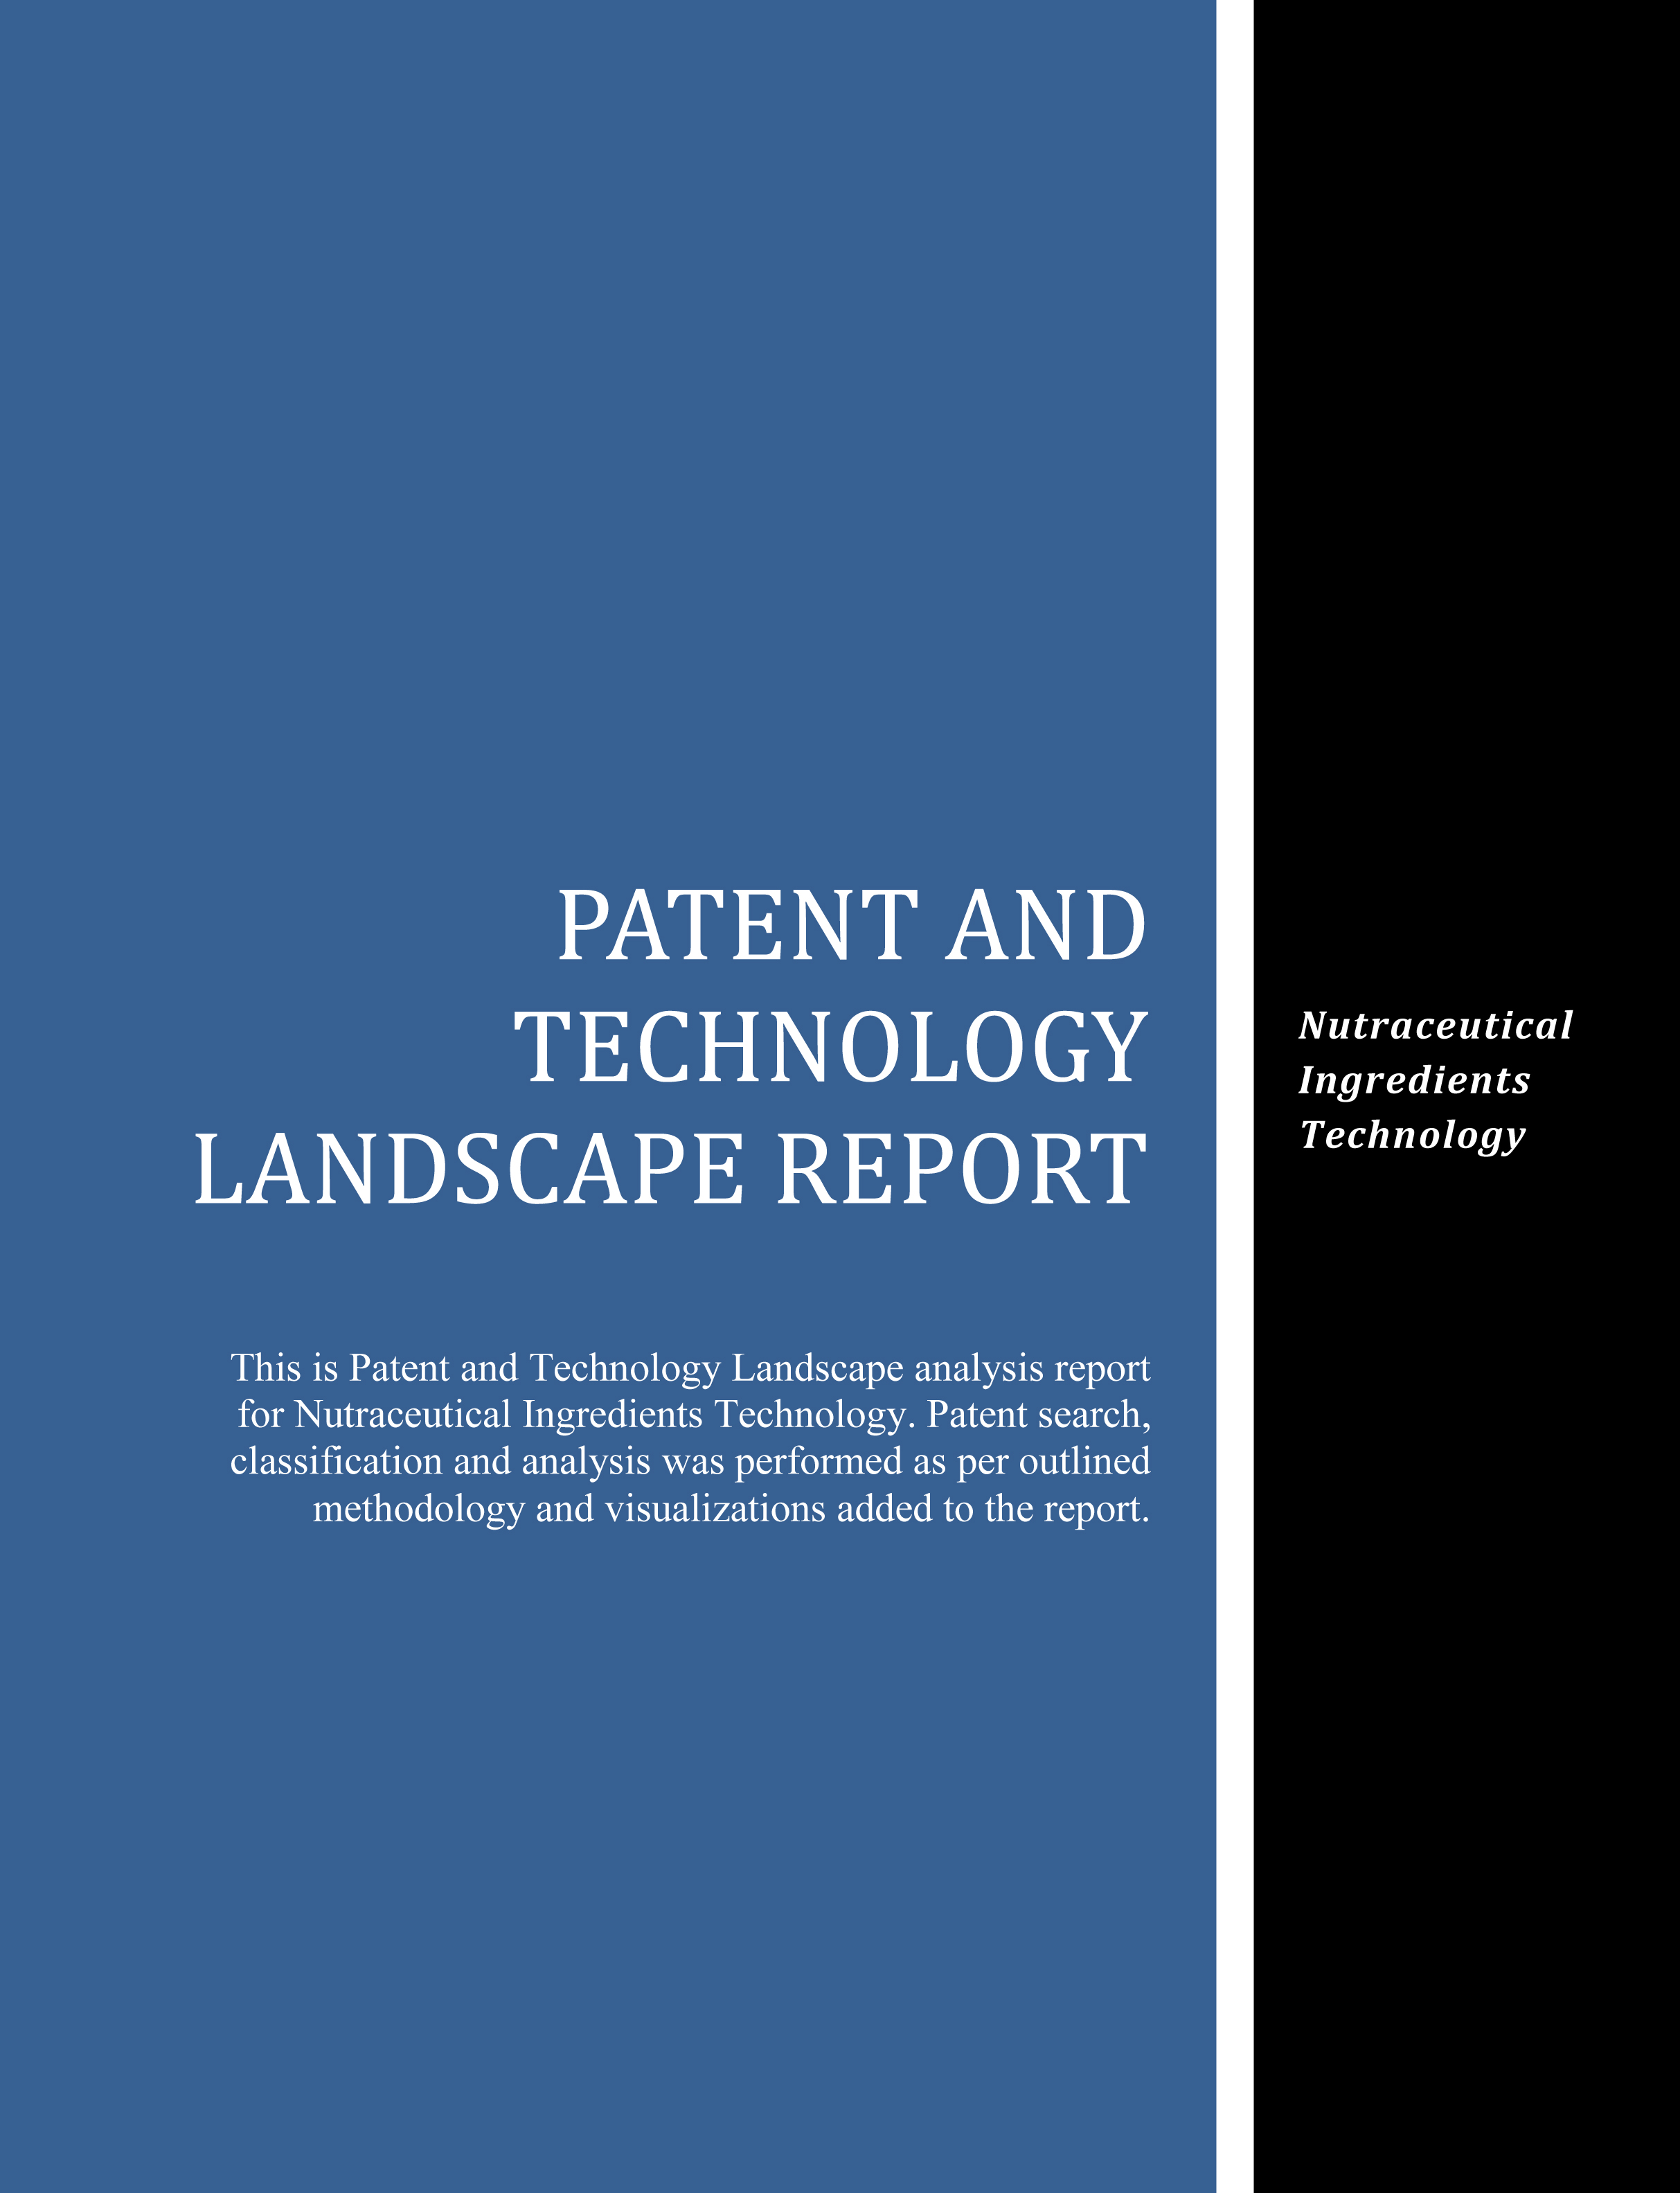 Nutraceutical Ingredients Technology Landscape Report